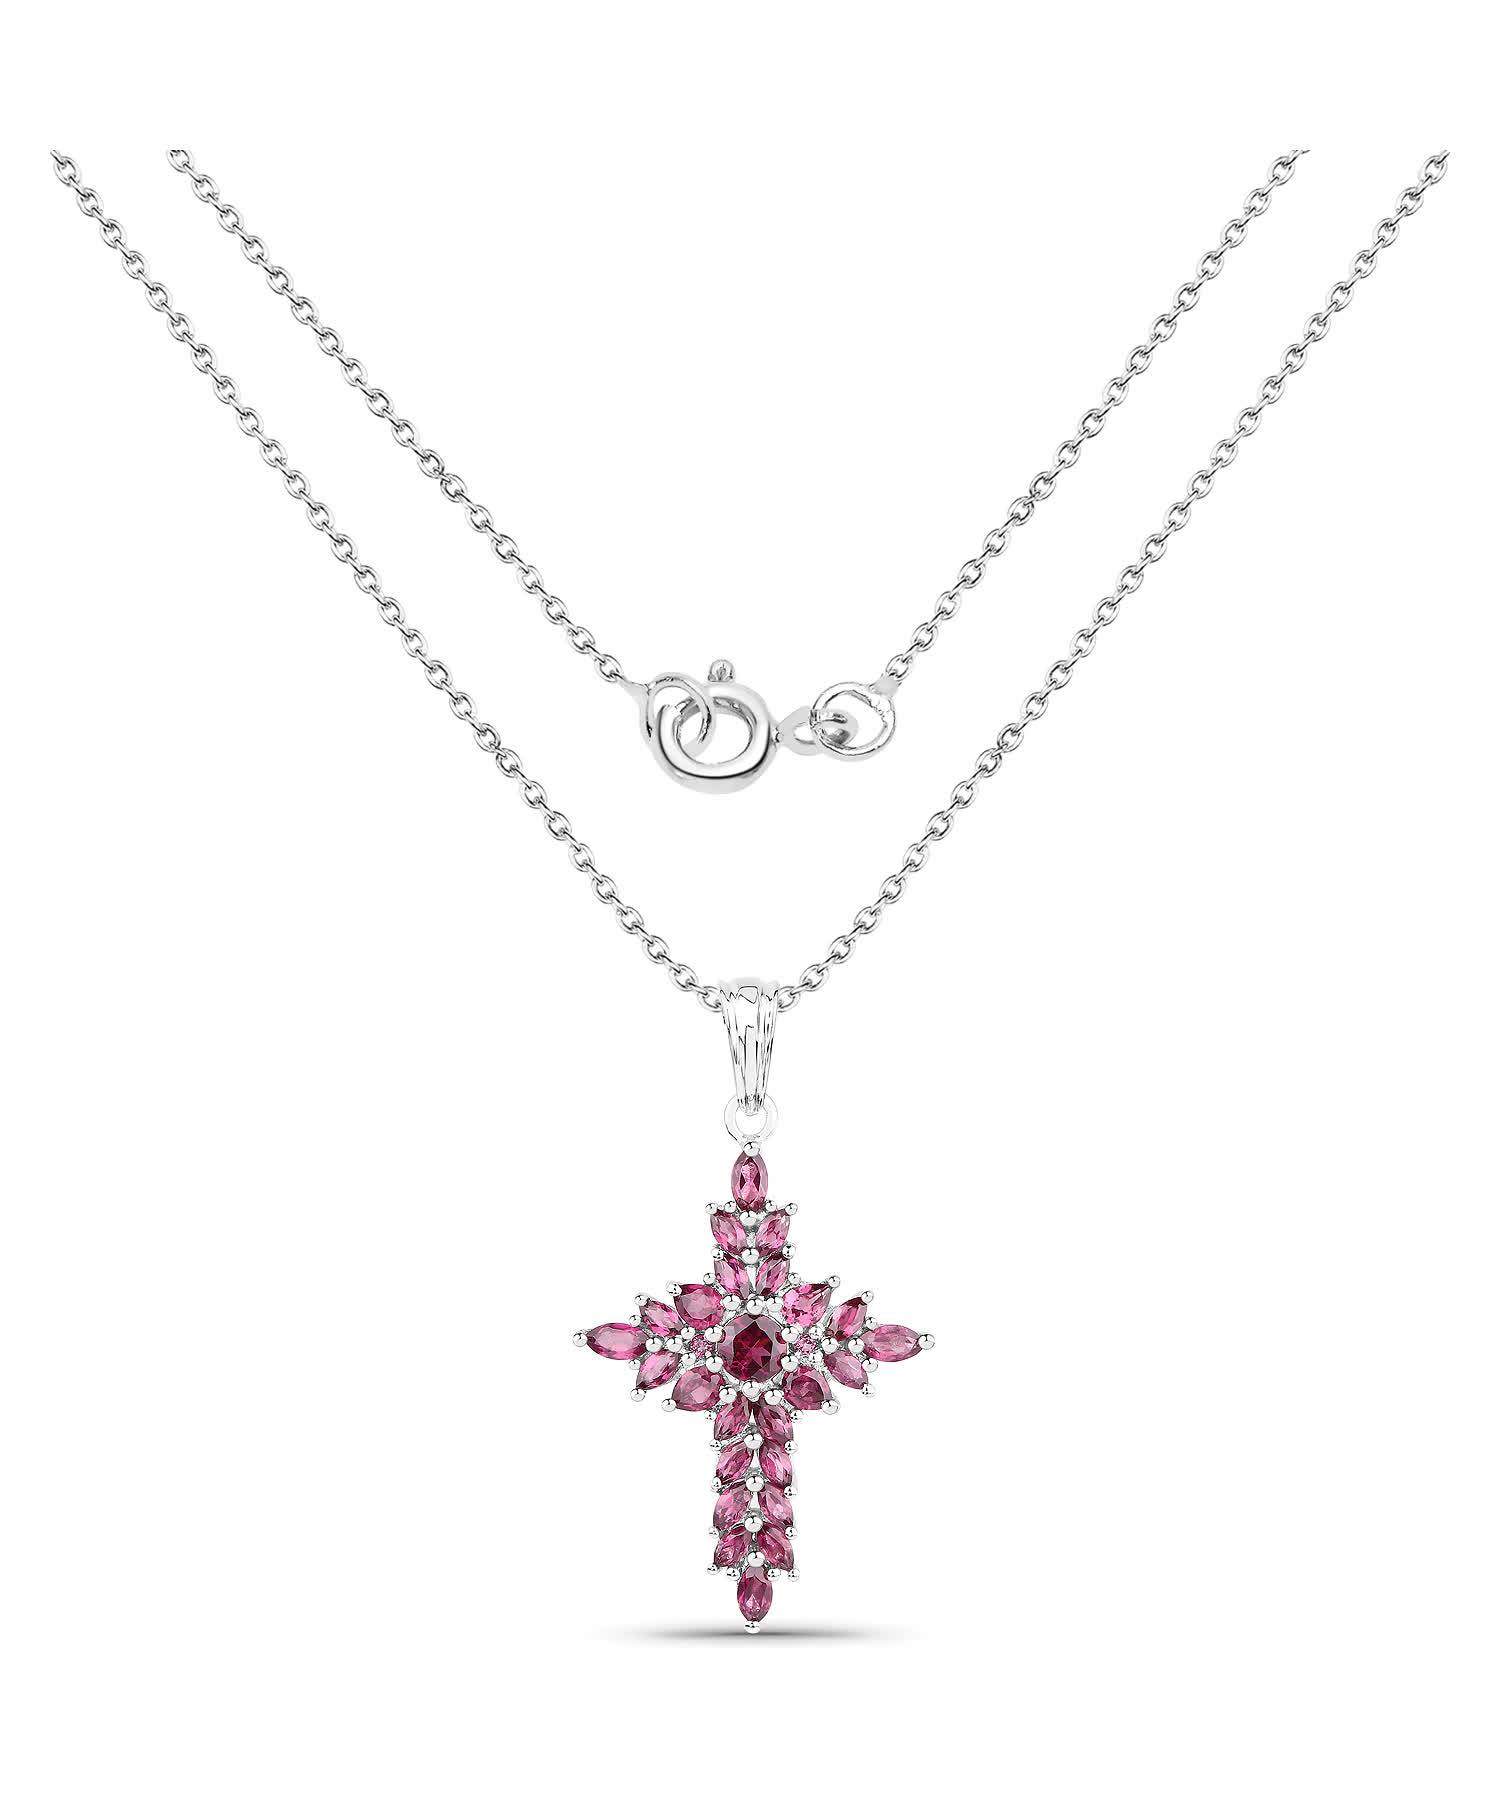 3.50ctw Natural Pomegranate Rhodolite Garnet Rhodium Plated 925 Sterling Silver Cross Pendant With Chain View 2